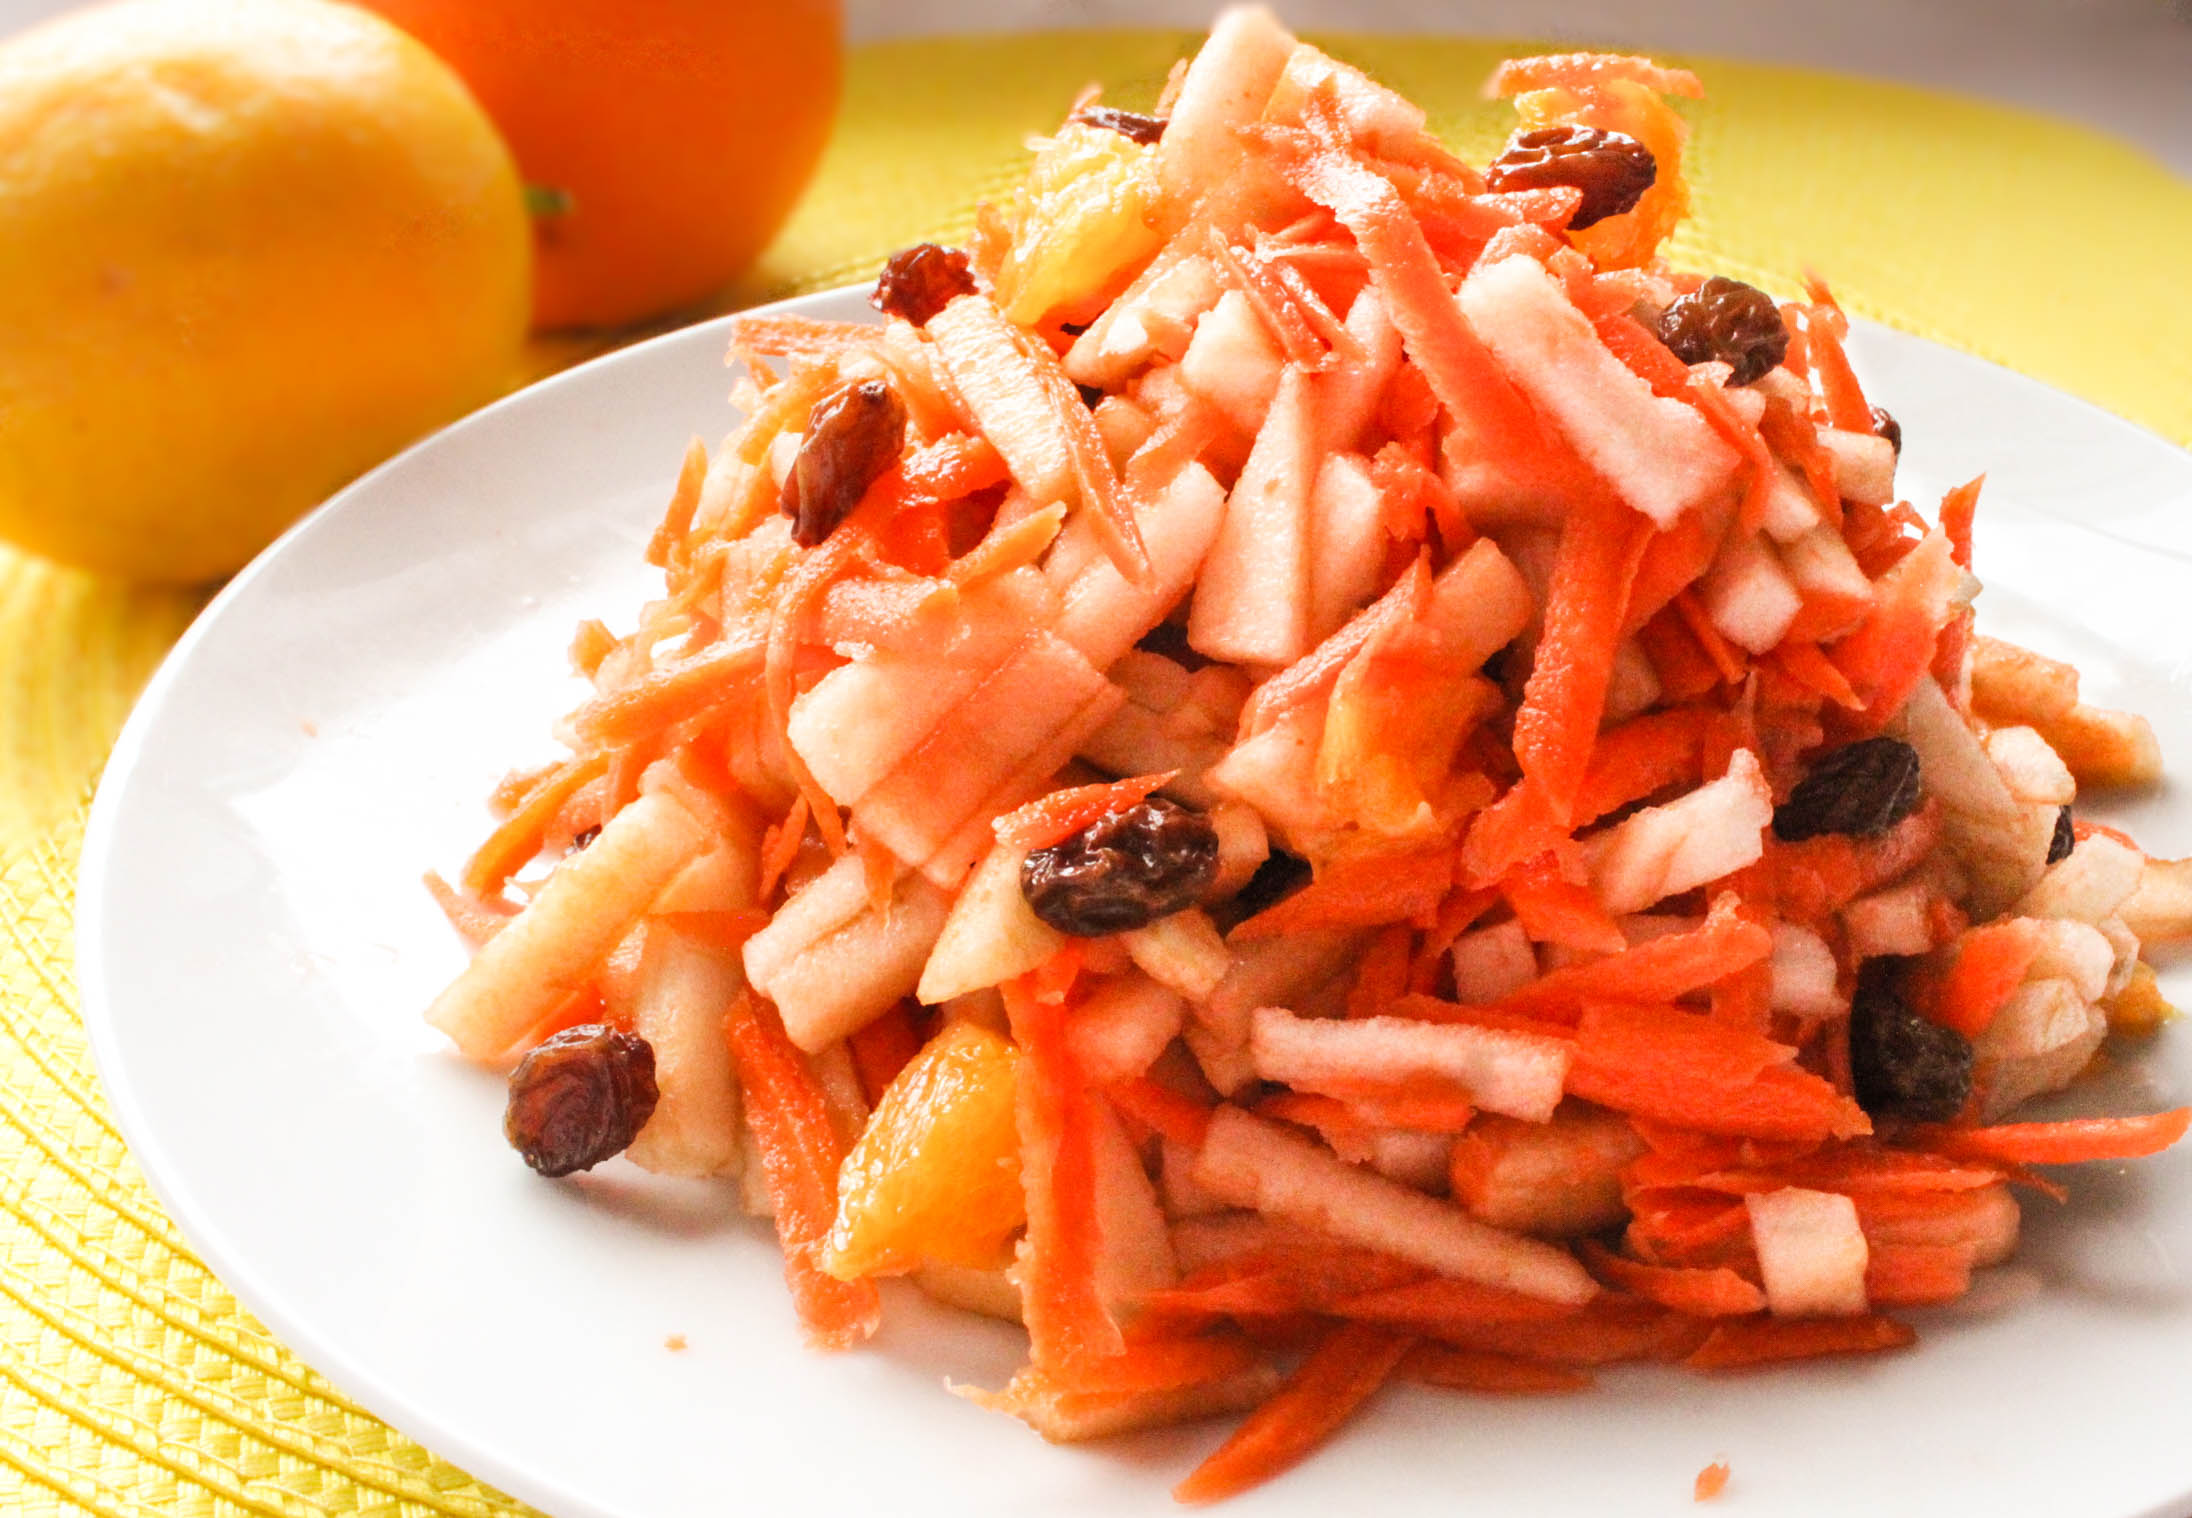 Carrot Salad with Apples and Raisins